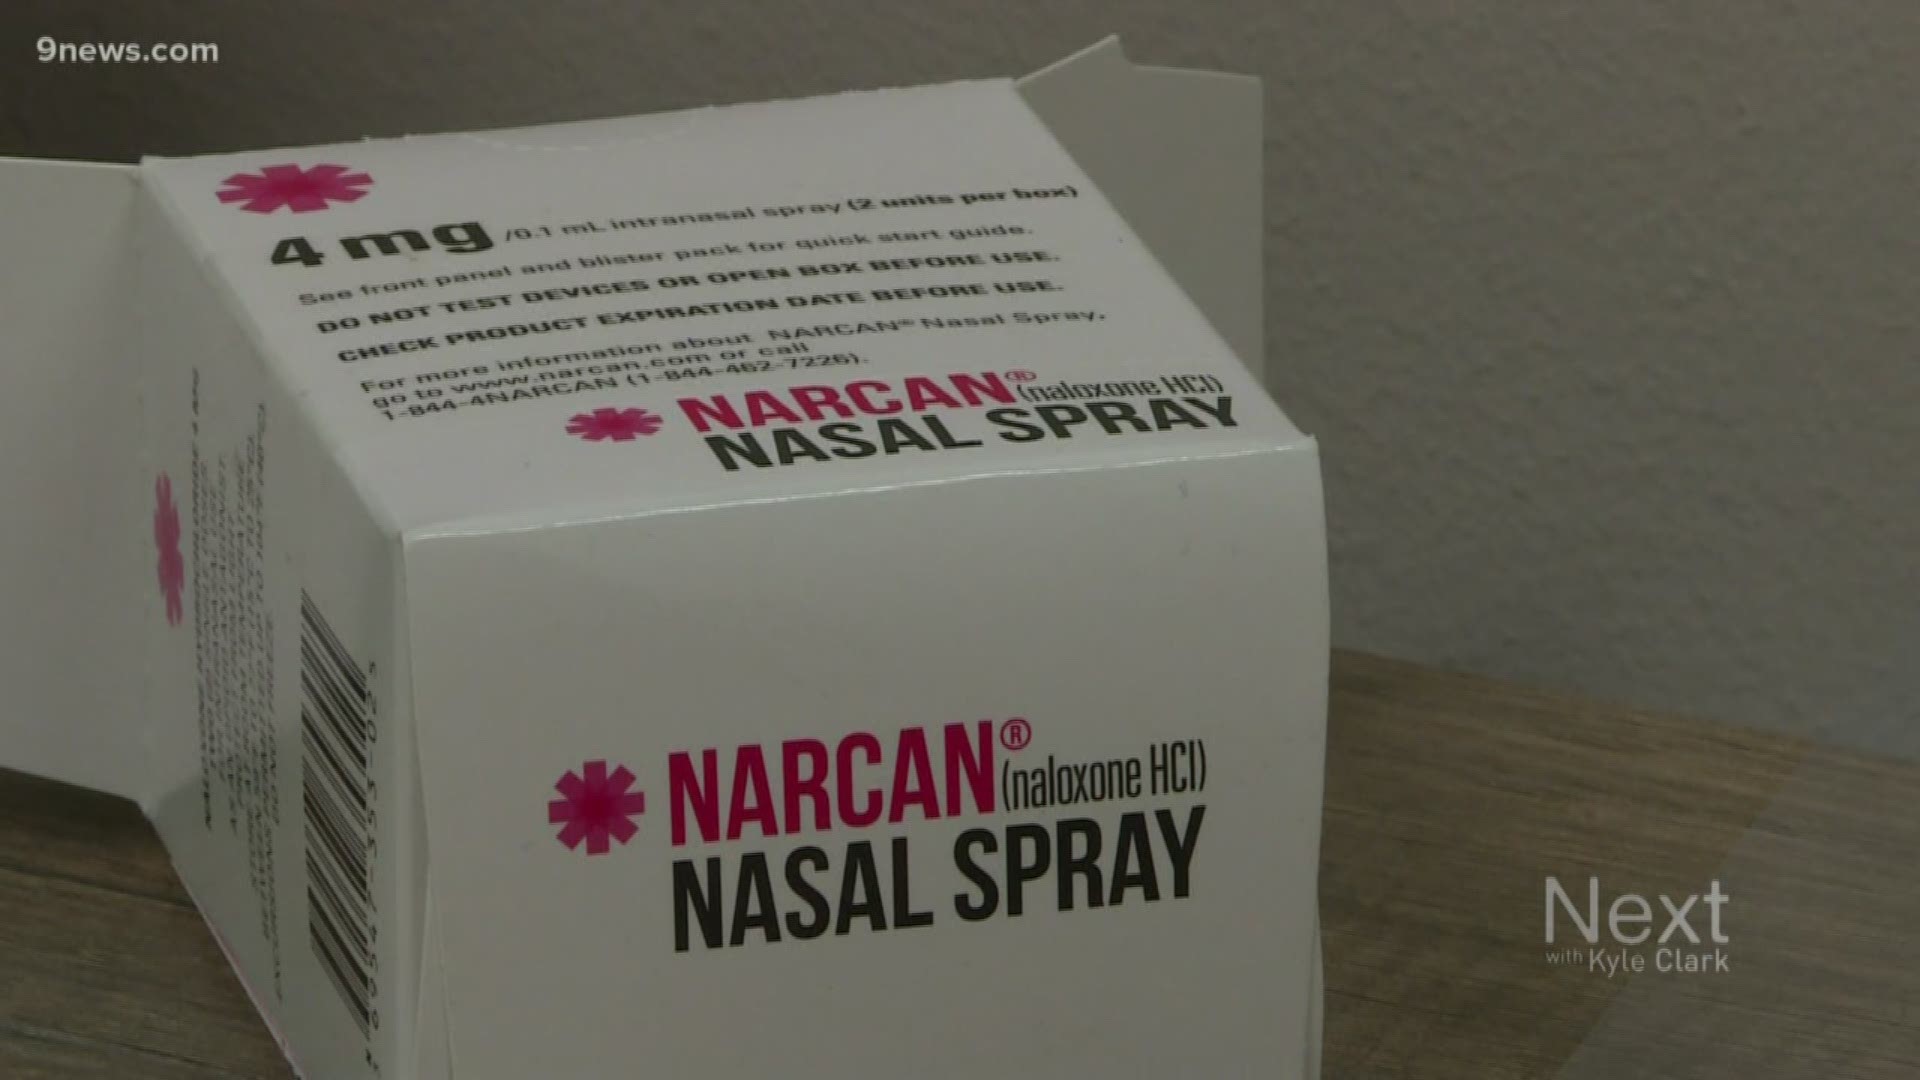 State lawmakers want to be crystal clear that if someone intervenes to try and reverse an overdose even when using expired naloxone they will not get in trouble.